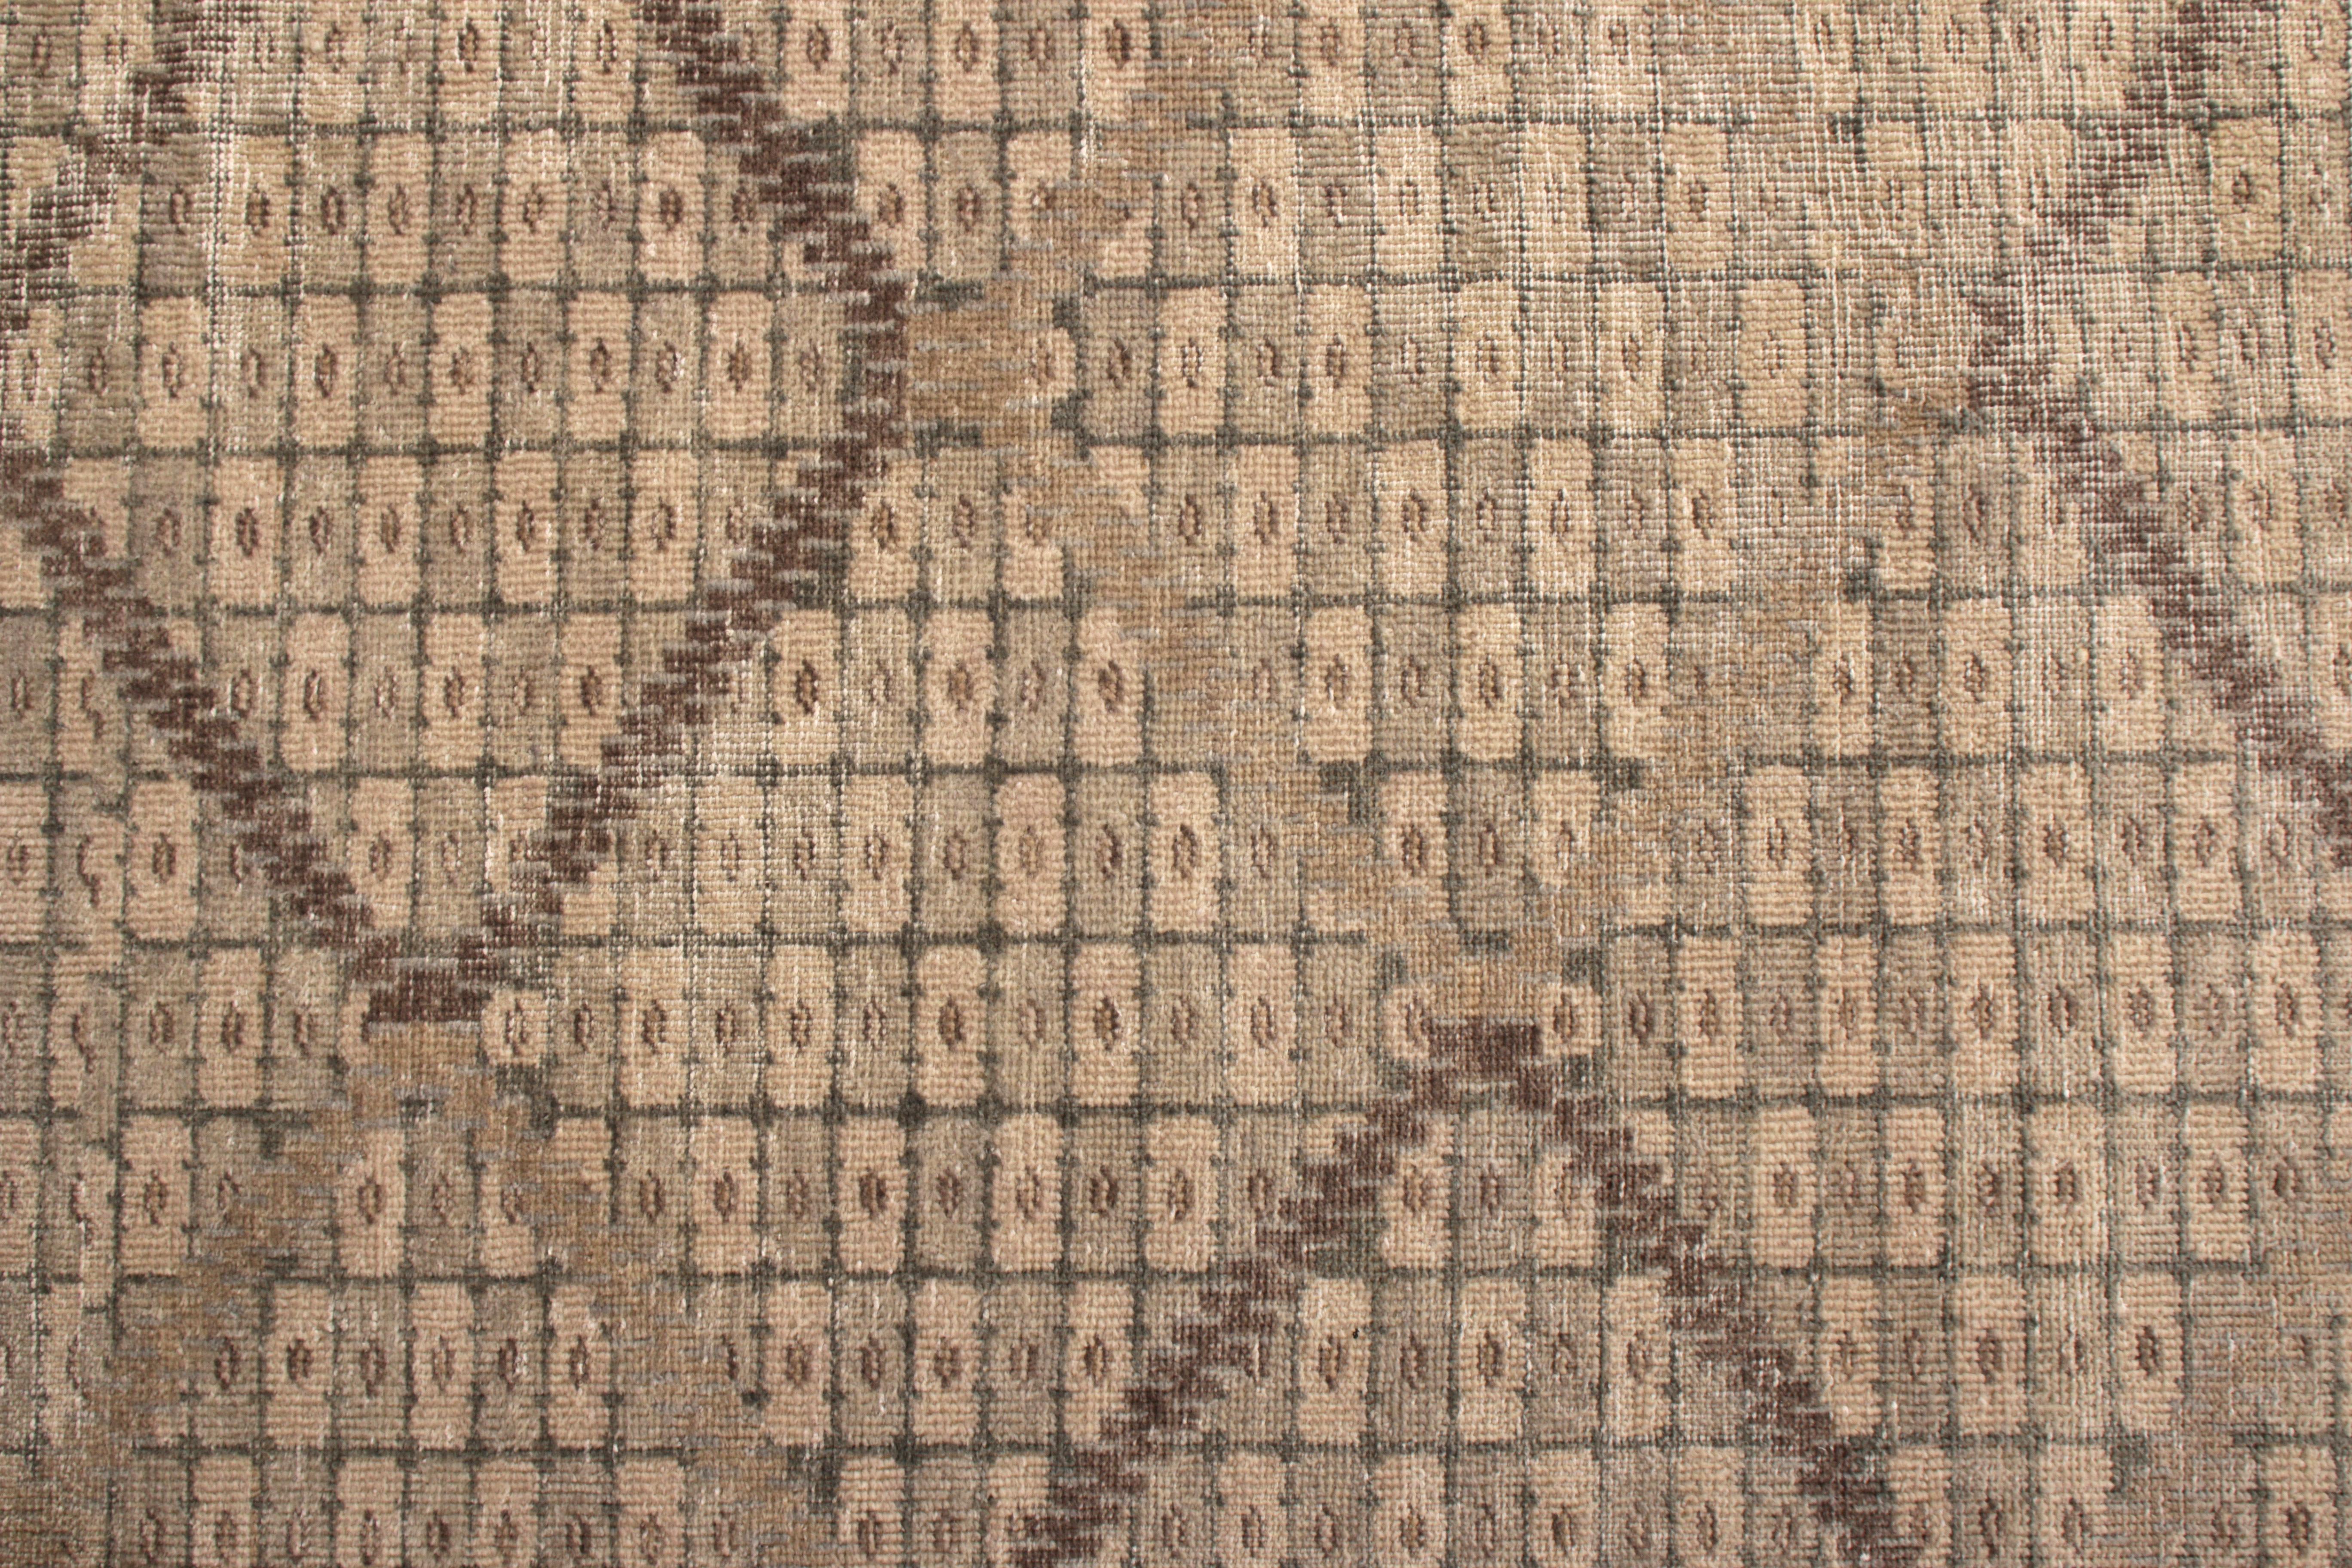 Indian Rug & Kilim's Hand Knotted Classic Rug Beige-Brown Blue Pattern For Sale